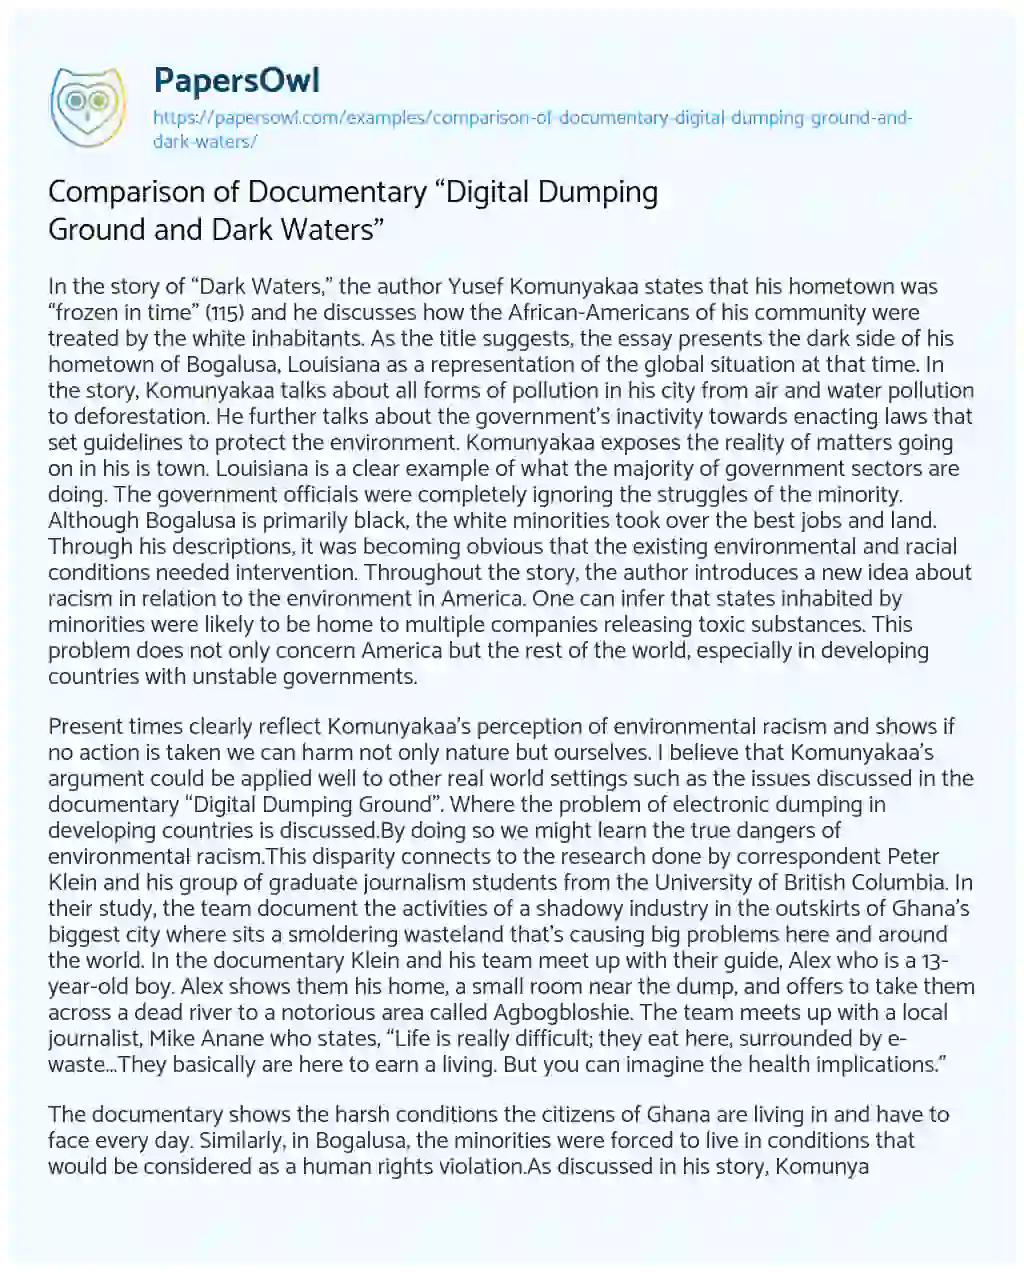 Essay on Comparison of Documentary “Digital Dumping Ground and Dark Waters”